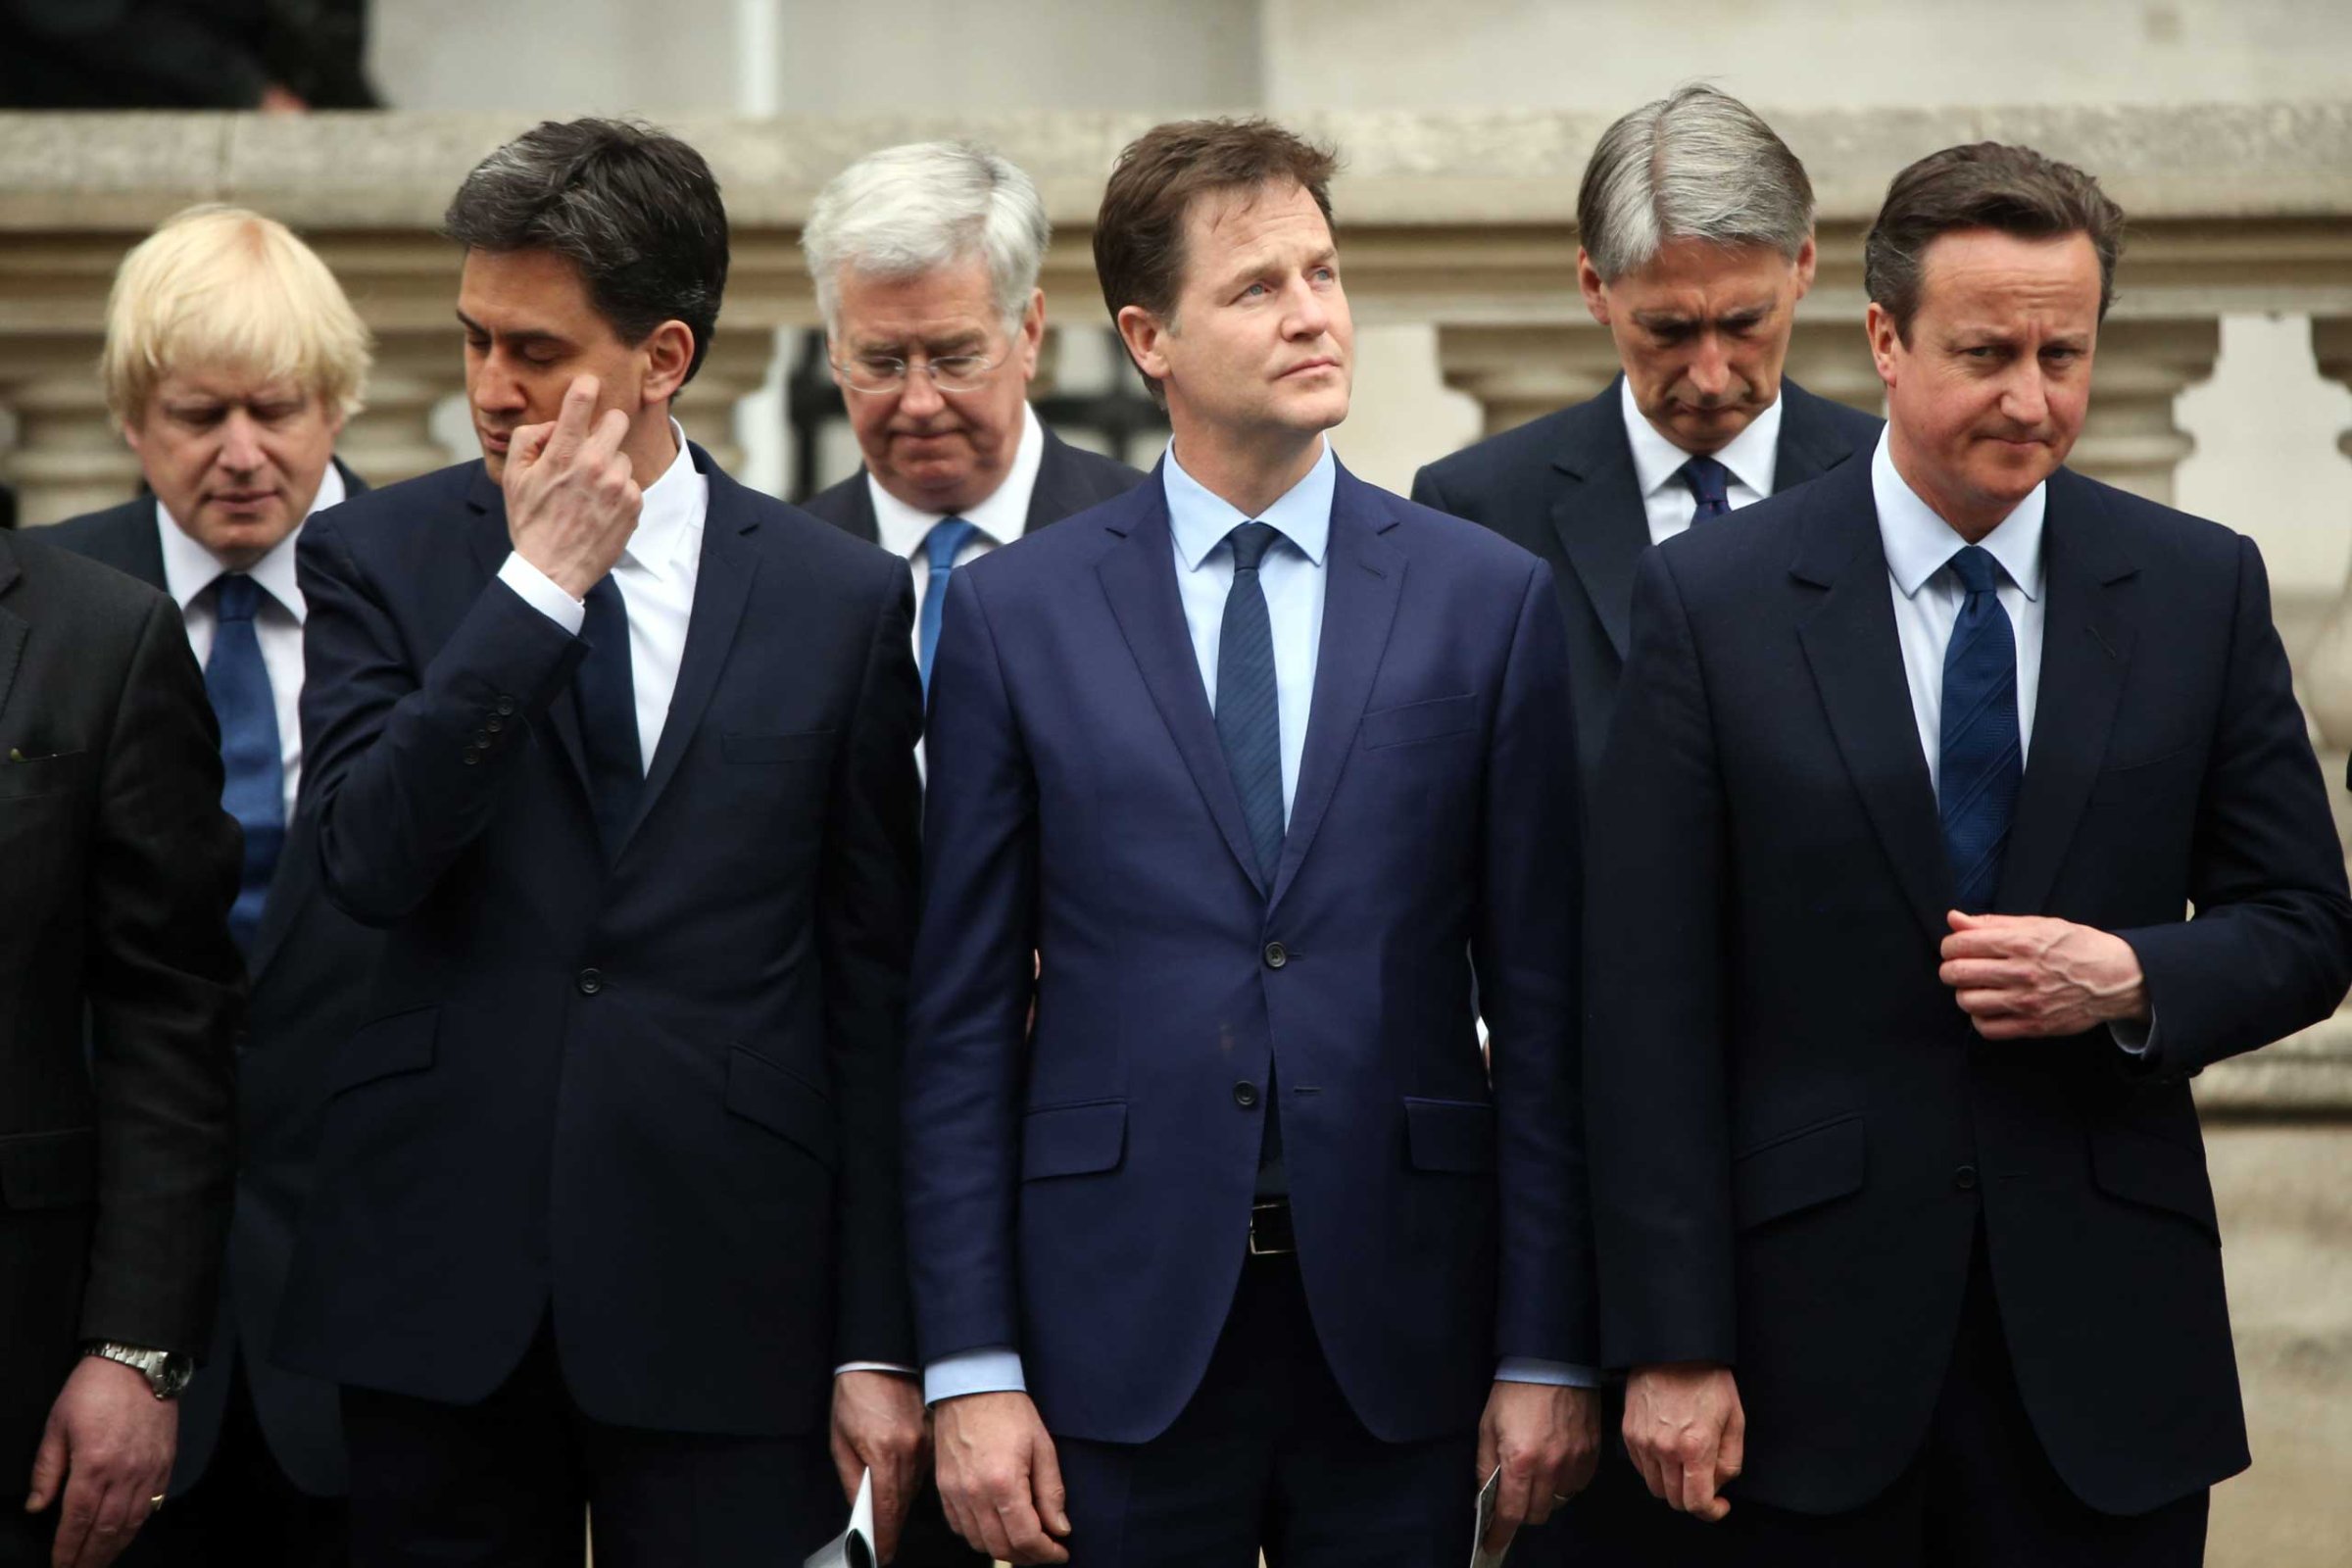 Labour Party leader Ed Miliband, Liberal Democrat leader Nick Clegg and Prime Minister David Cameron stand during a tribute at the Cenotaph to begin three days of national commemorations to mark the 70th anniversary of VE Day on May 8, 2015 in London.